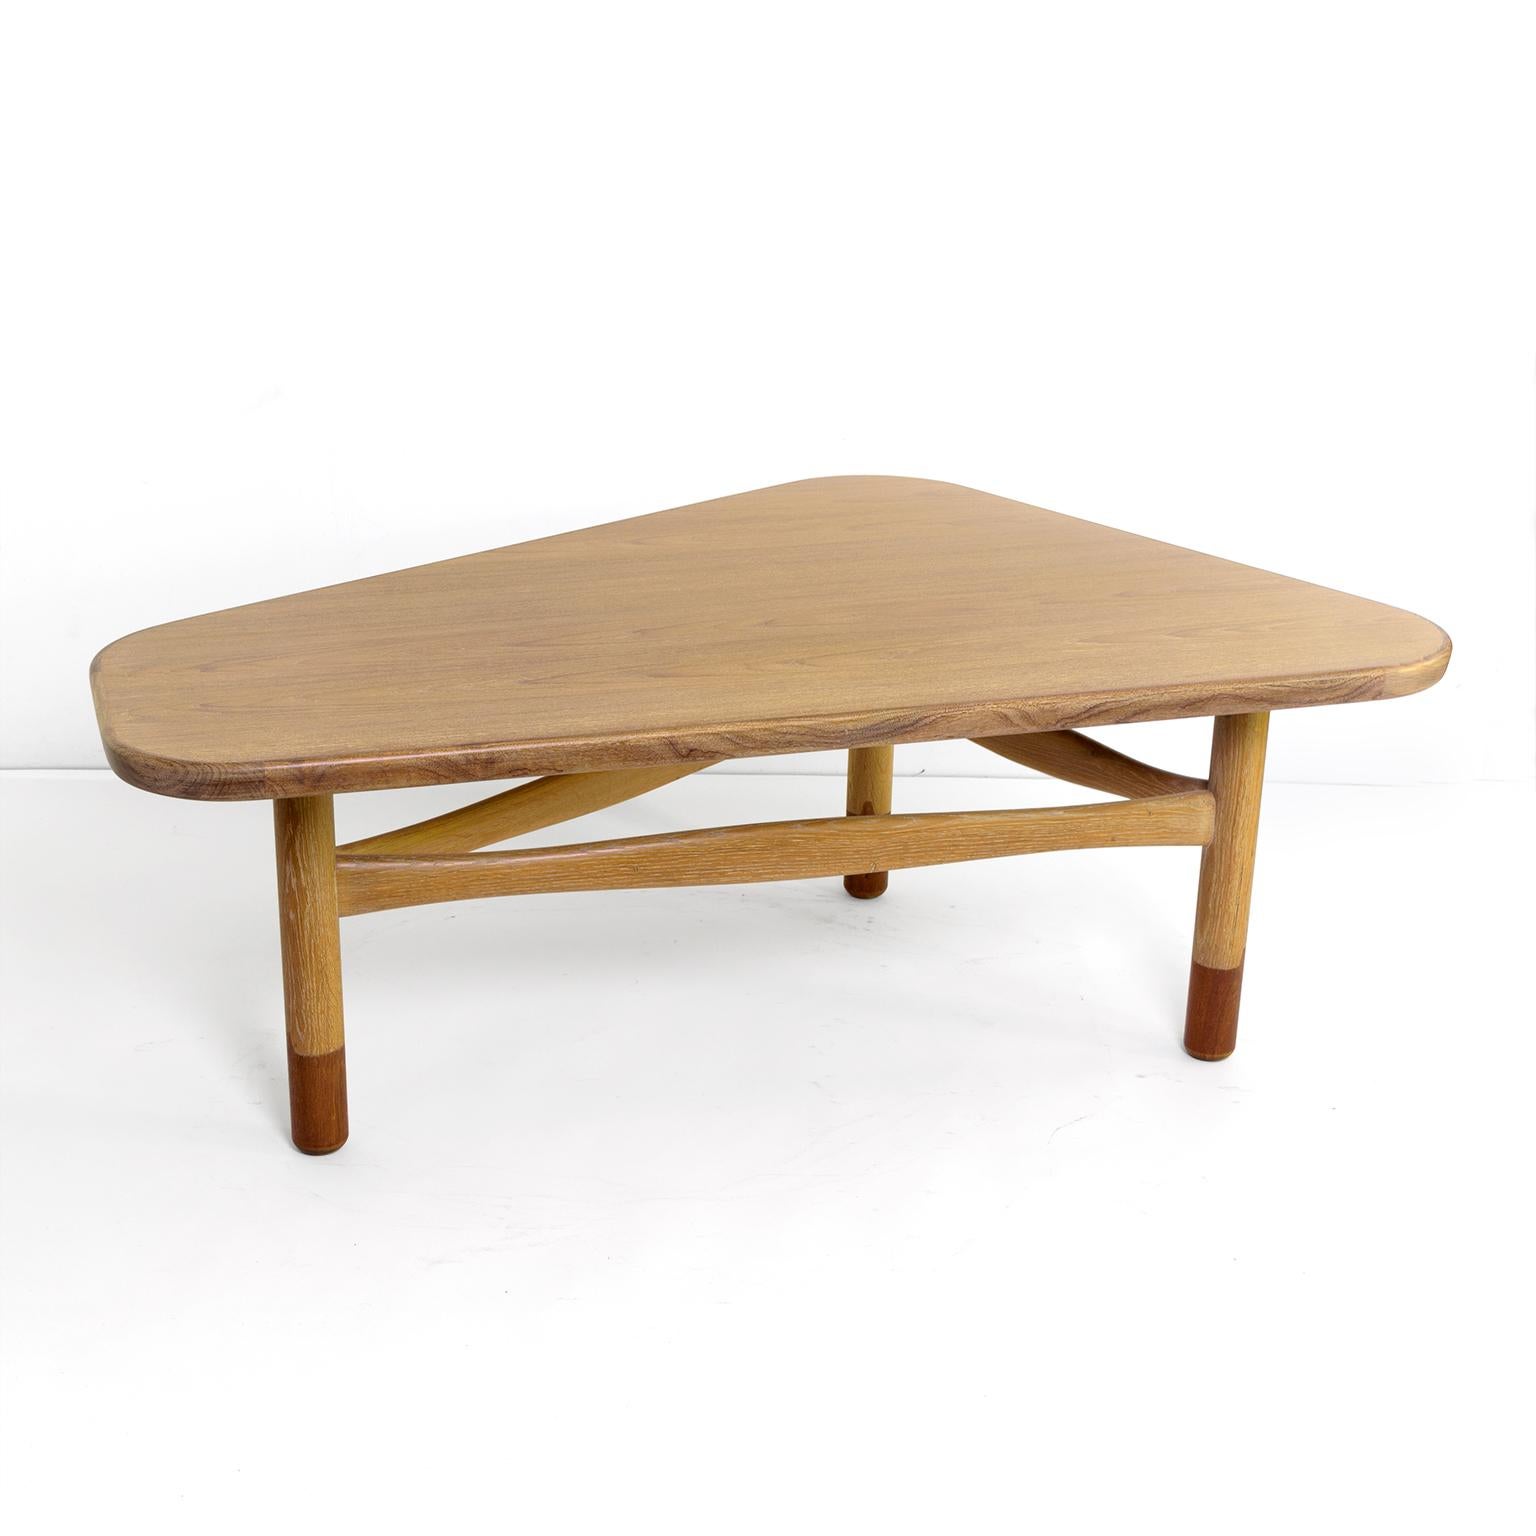 Yngve Ekström, Scandinavian Modern coffee table made by Westbergs Mobler, Tranås, Sweden circa 1950’s. The table is constructed from solid oak and teak which has been Cerused. The table has a gently rounded triangular top which sits on three leges